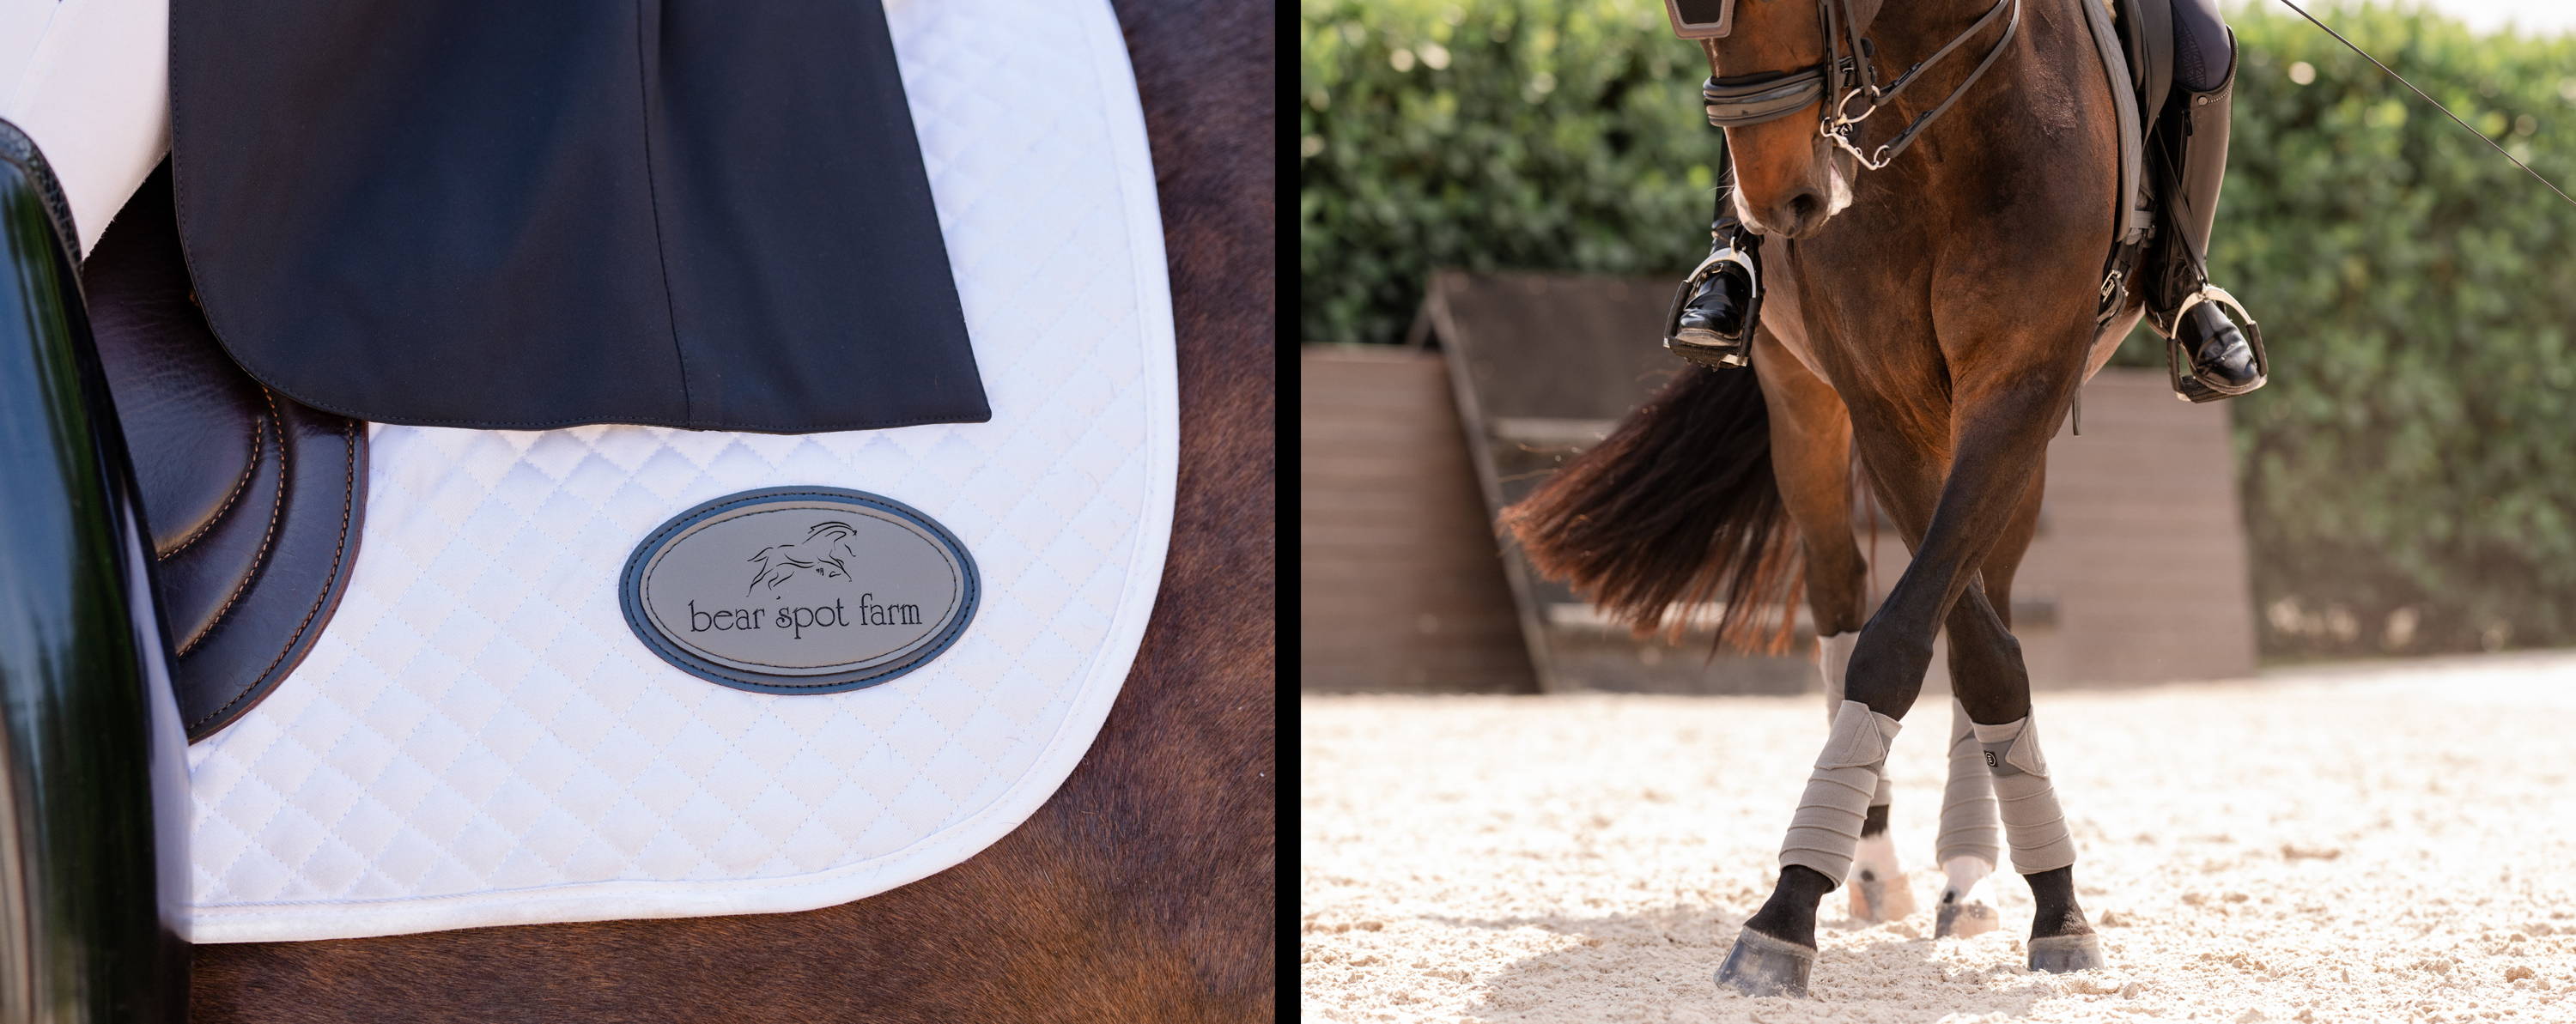 Essential Dressage Square Pad with Personalized Patch and Grey Essential Polo Wraps on Horse